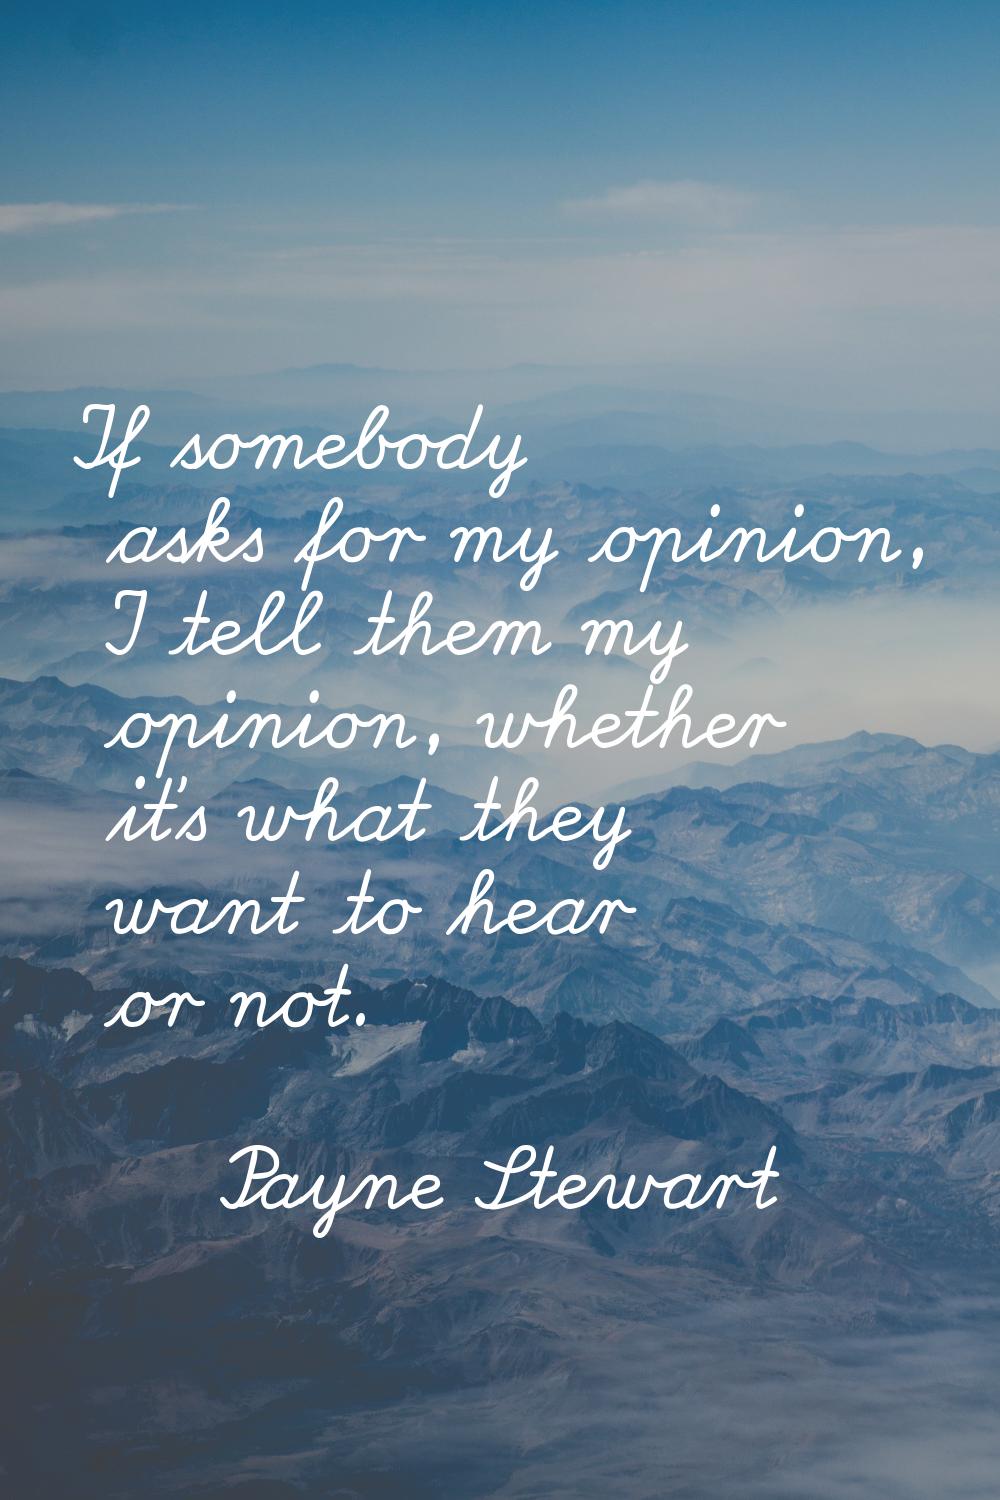 If somebody asks for my opinion, I tell them my opinion, whether it's what they want to hear or not